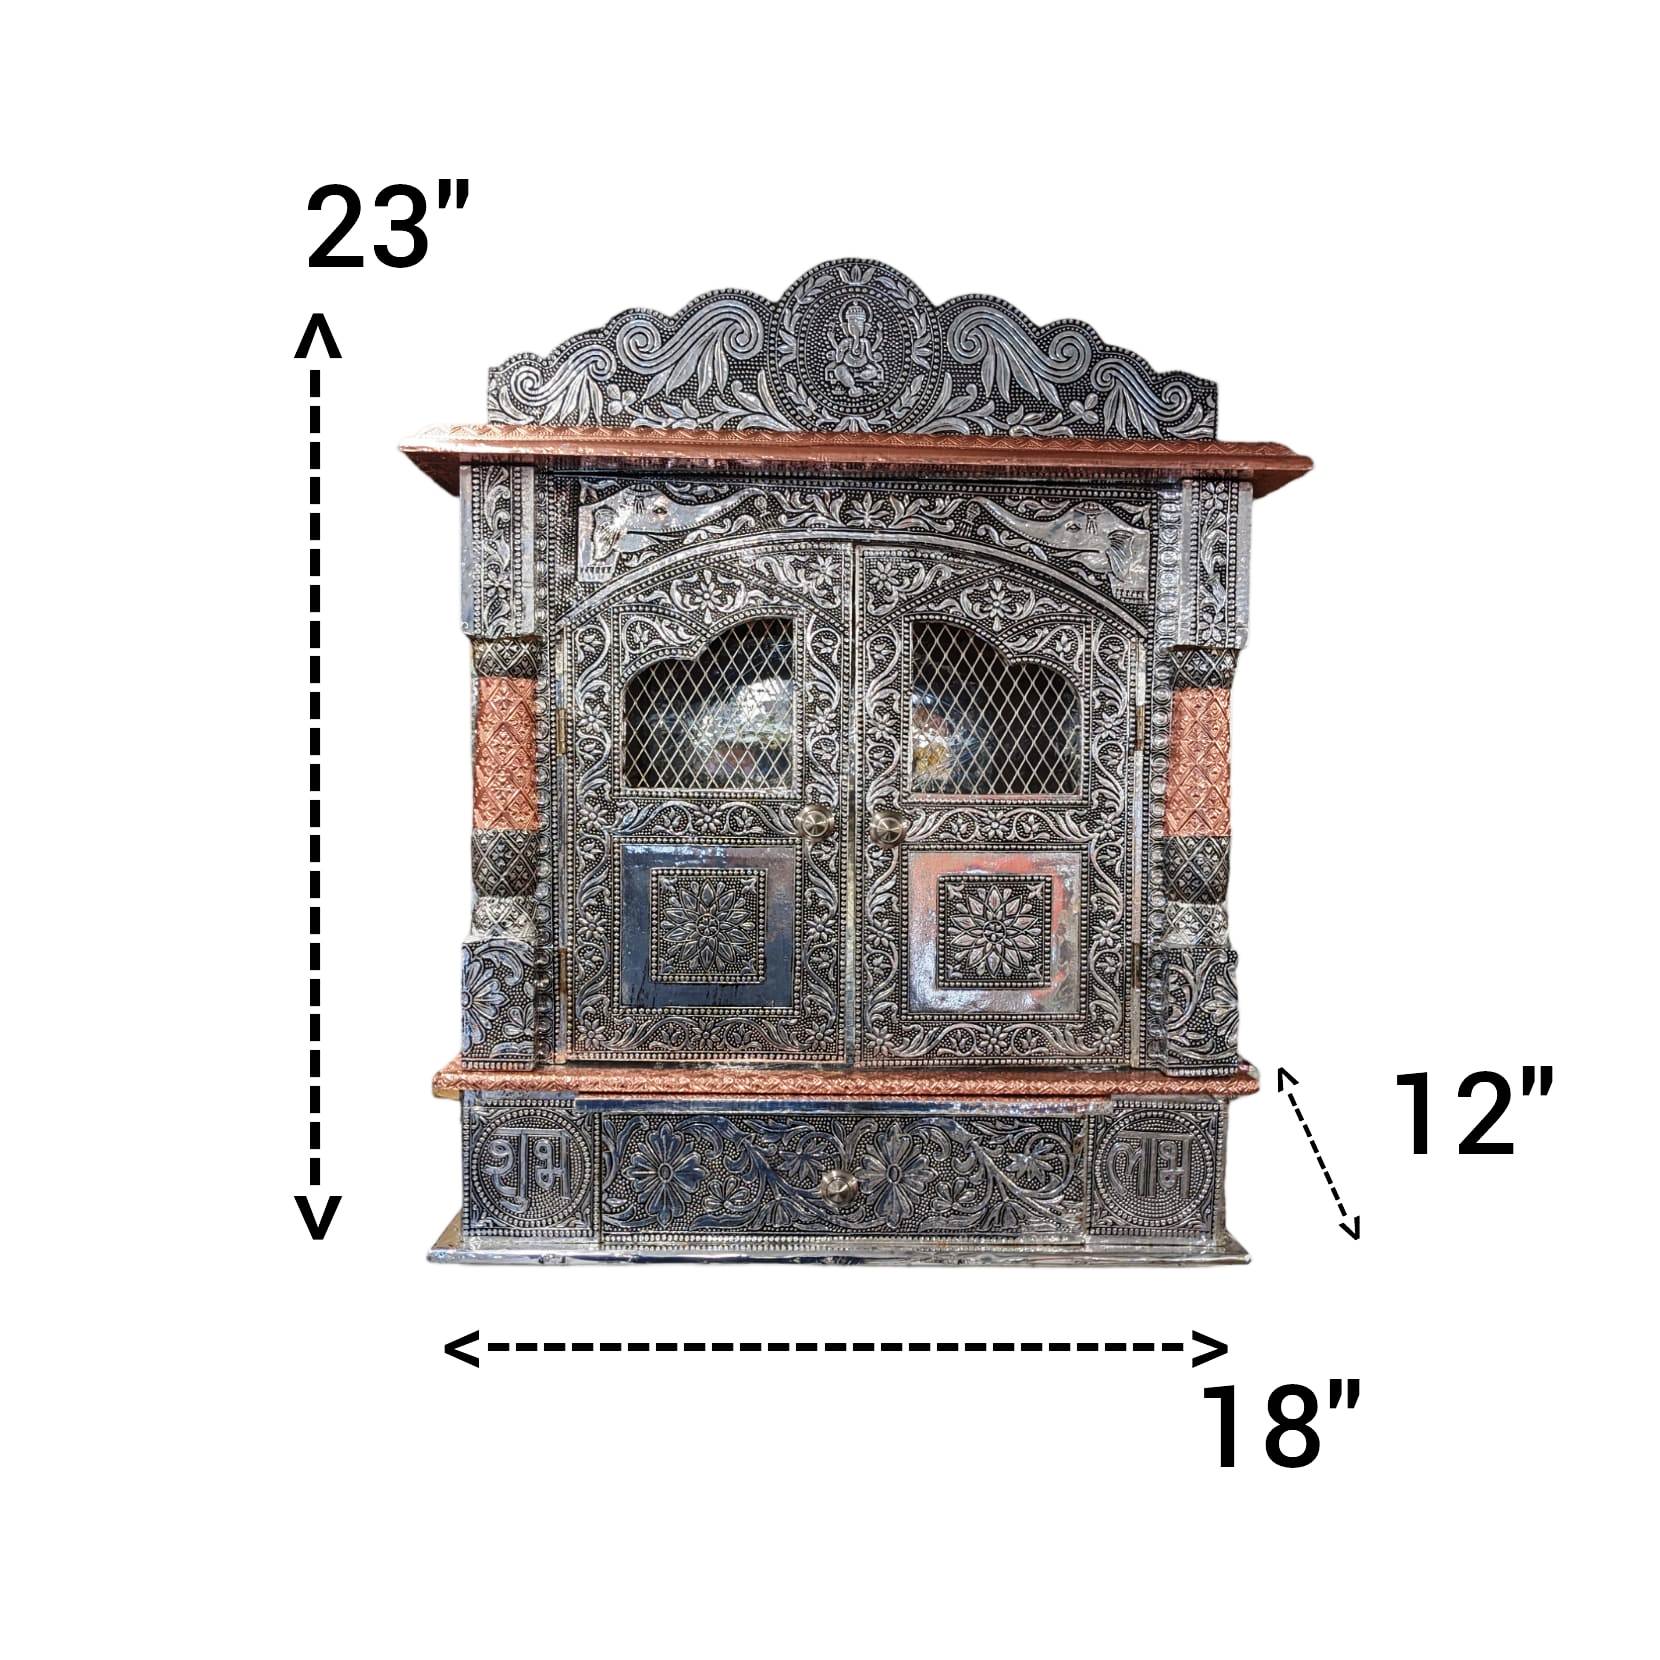 Image of a Wooden Home Mandir - 18 inch x 12 inch with doors , the base is wood and then its wrapped with embossed aluminum sheet